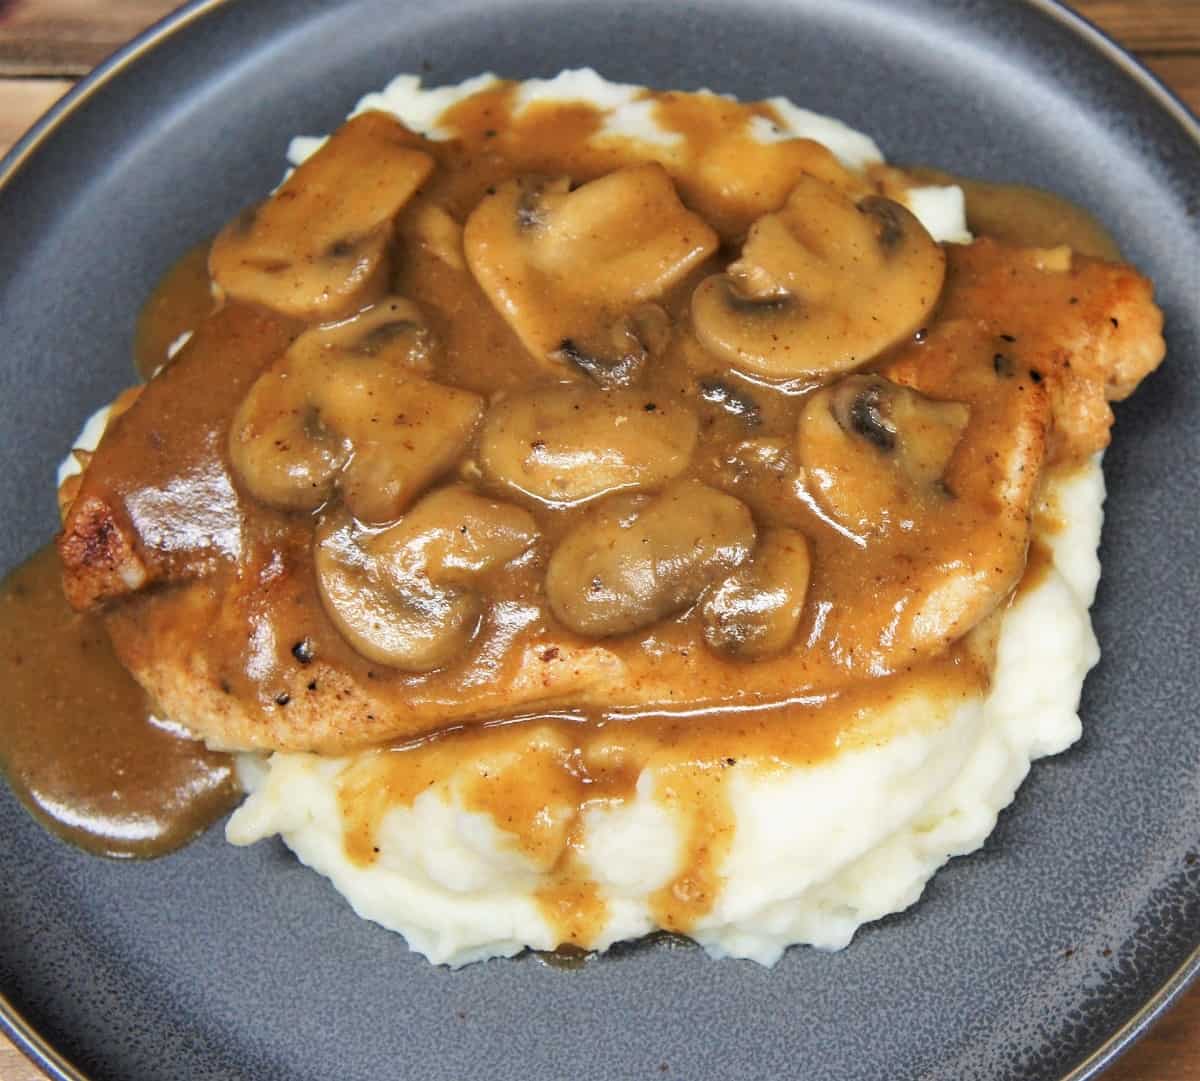 Thin chicken breasts covered in brown mushroom gravy served on a bed of mashed potatoes on a gray plate.